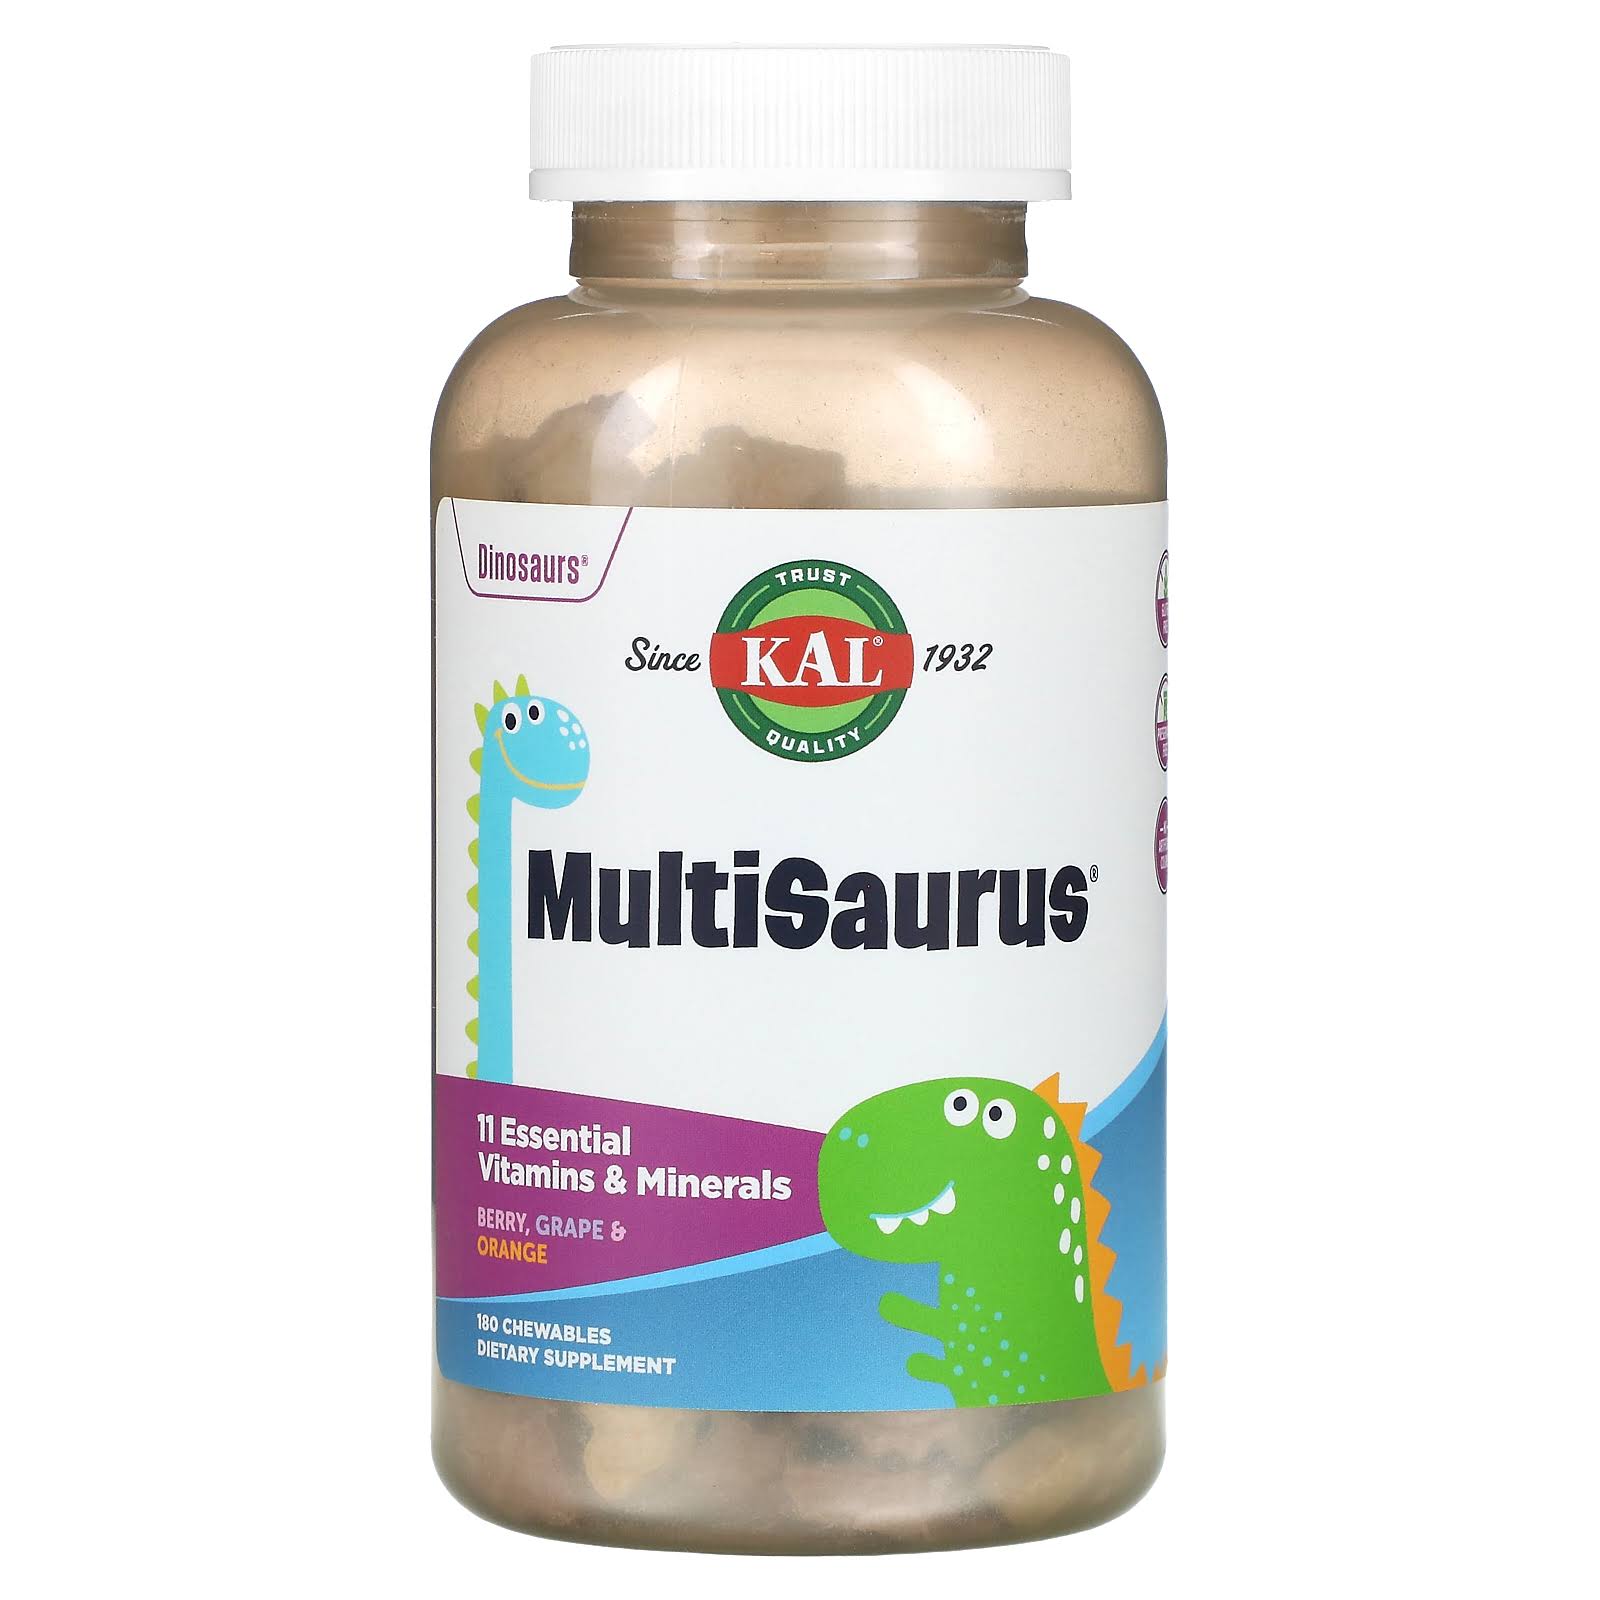 Kal Dinosaurs Multisaurus Childrens Vitamins And Minerals Supplement - Berry Grape And Orange, 180ct